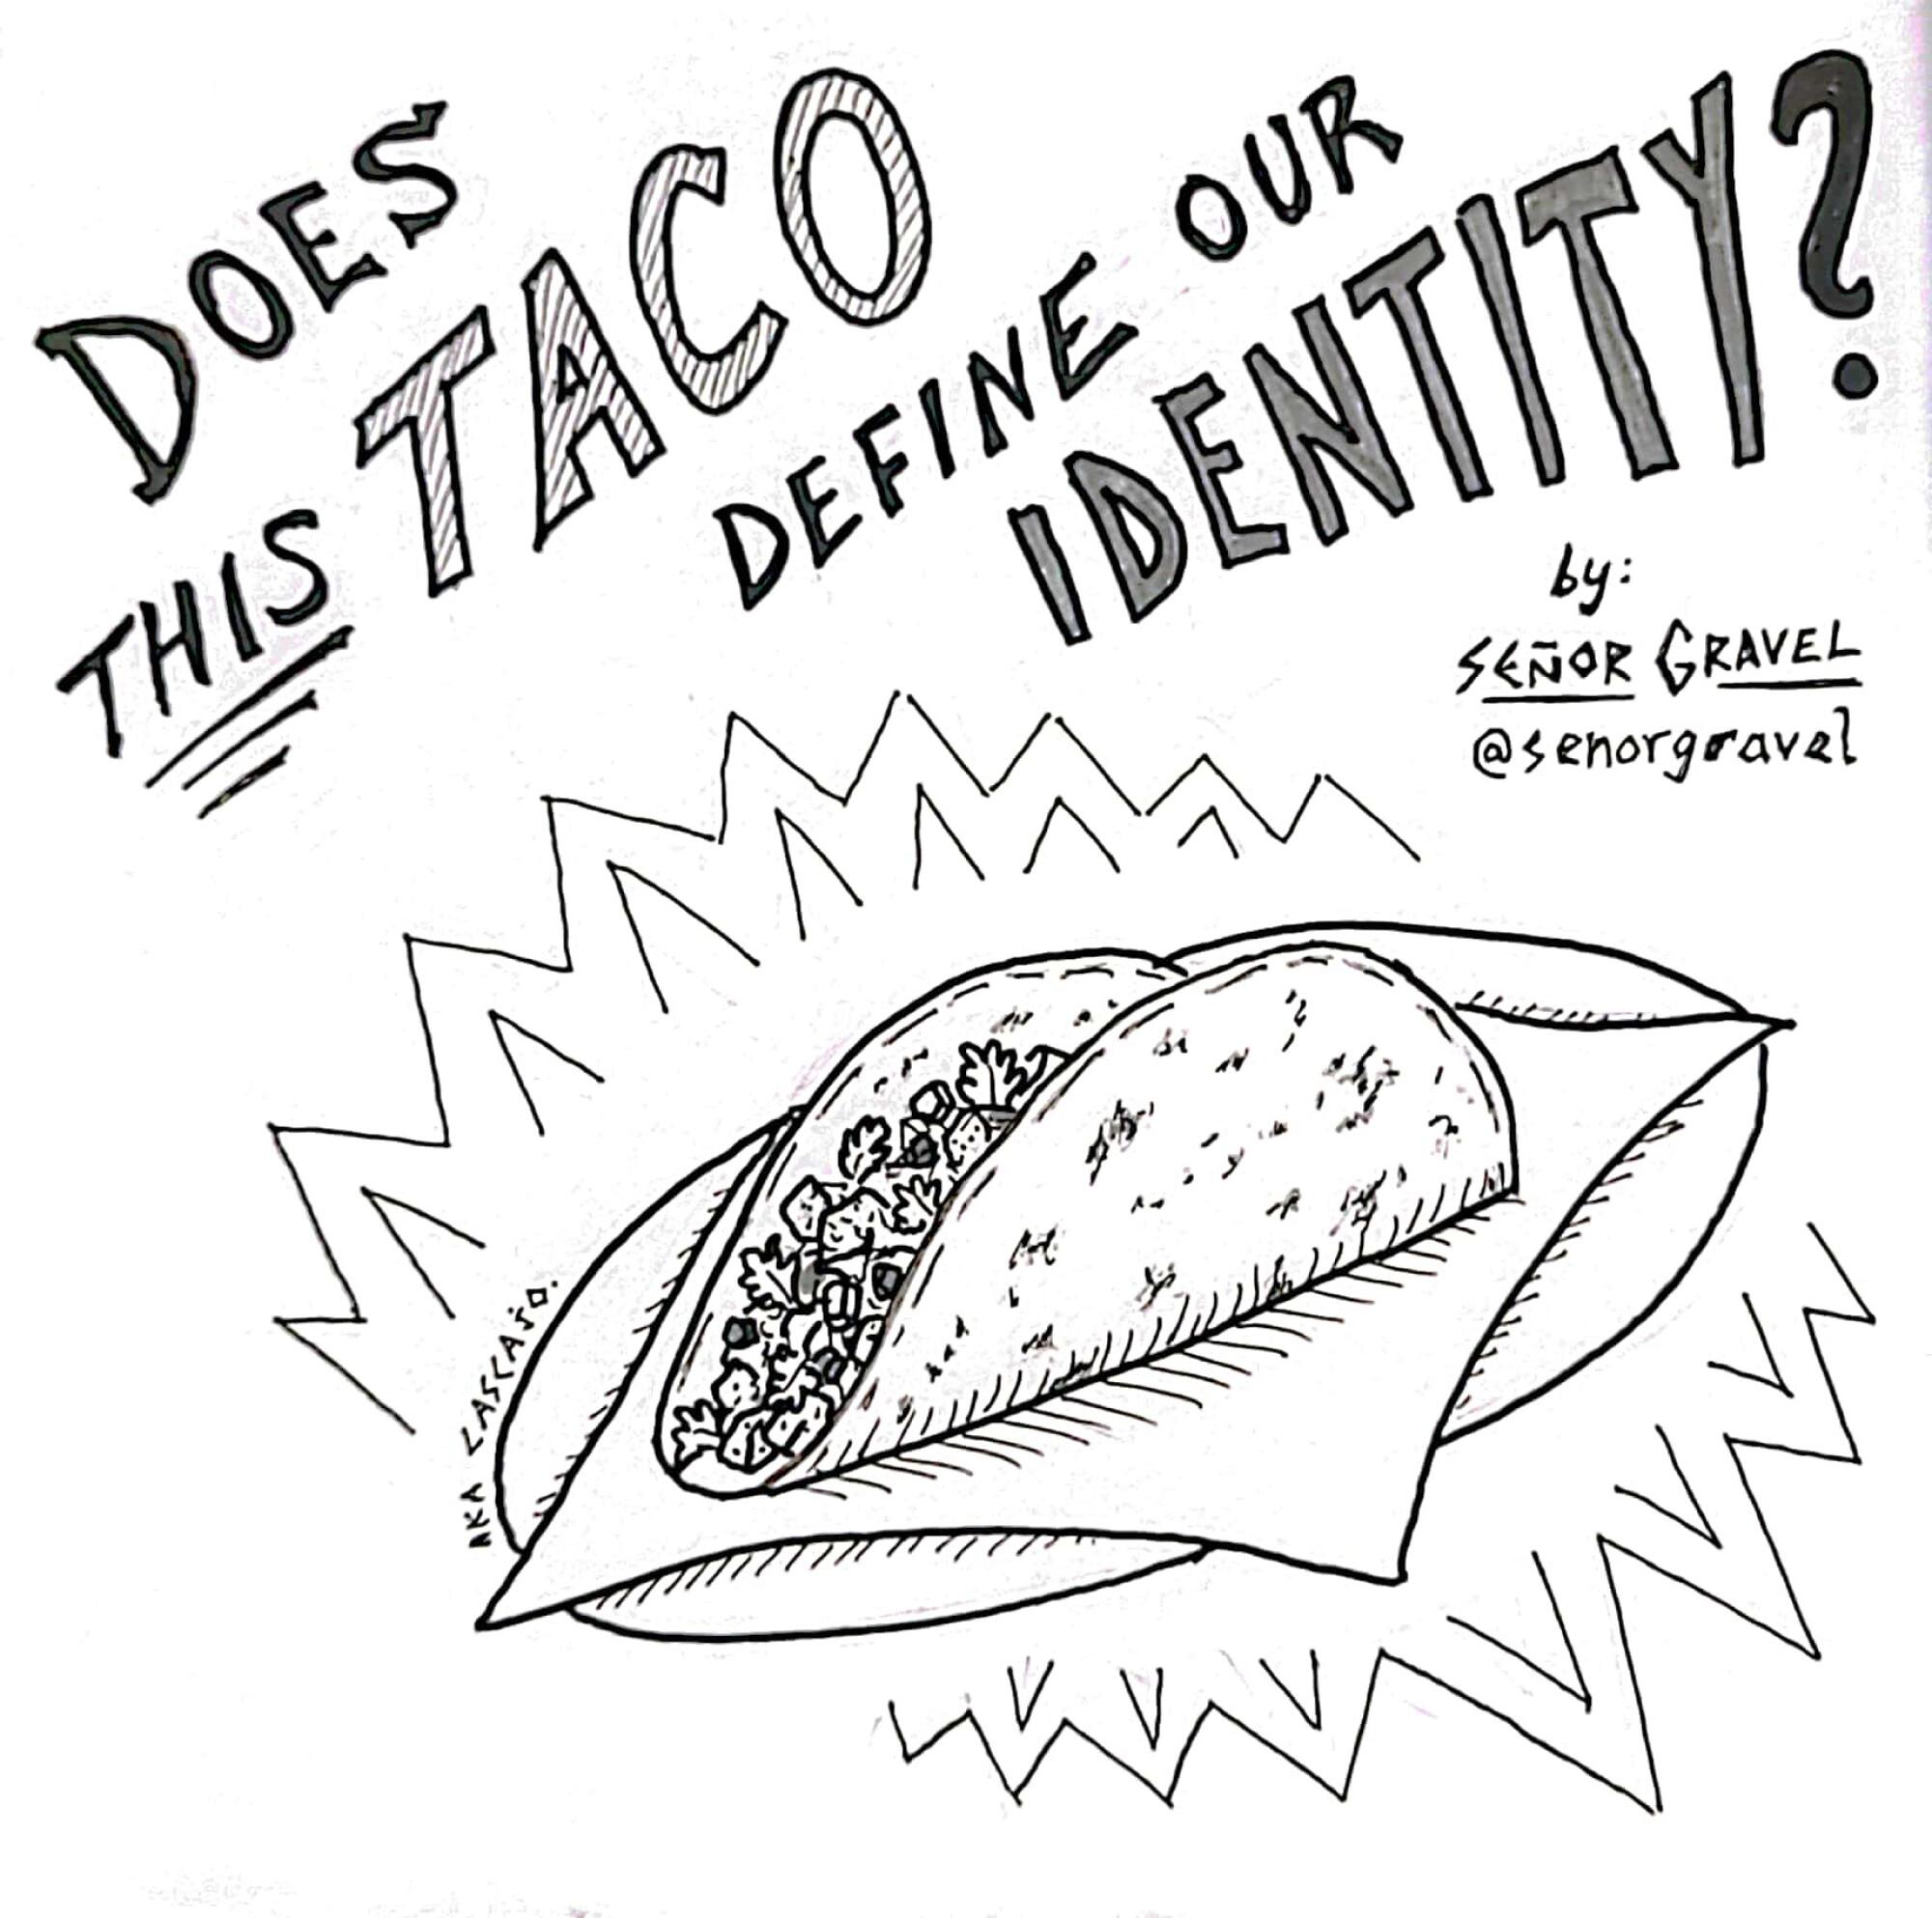 Does this taco define our identity?